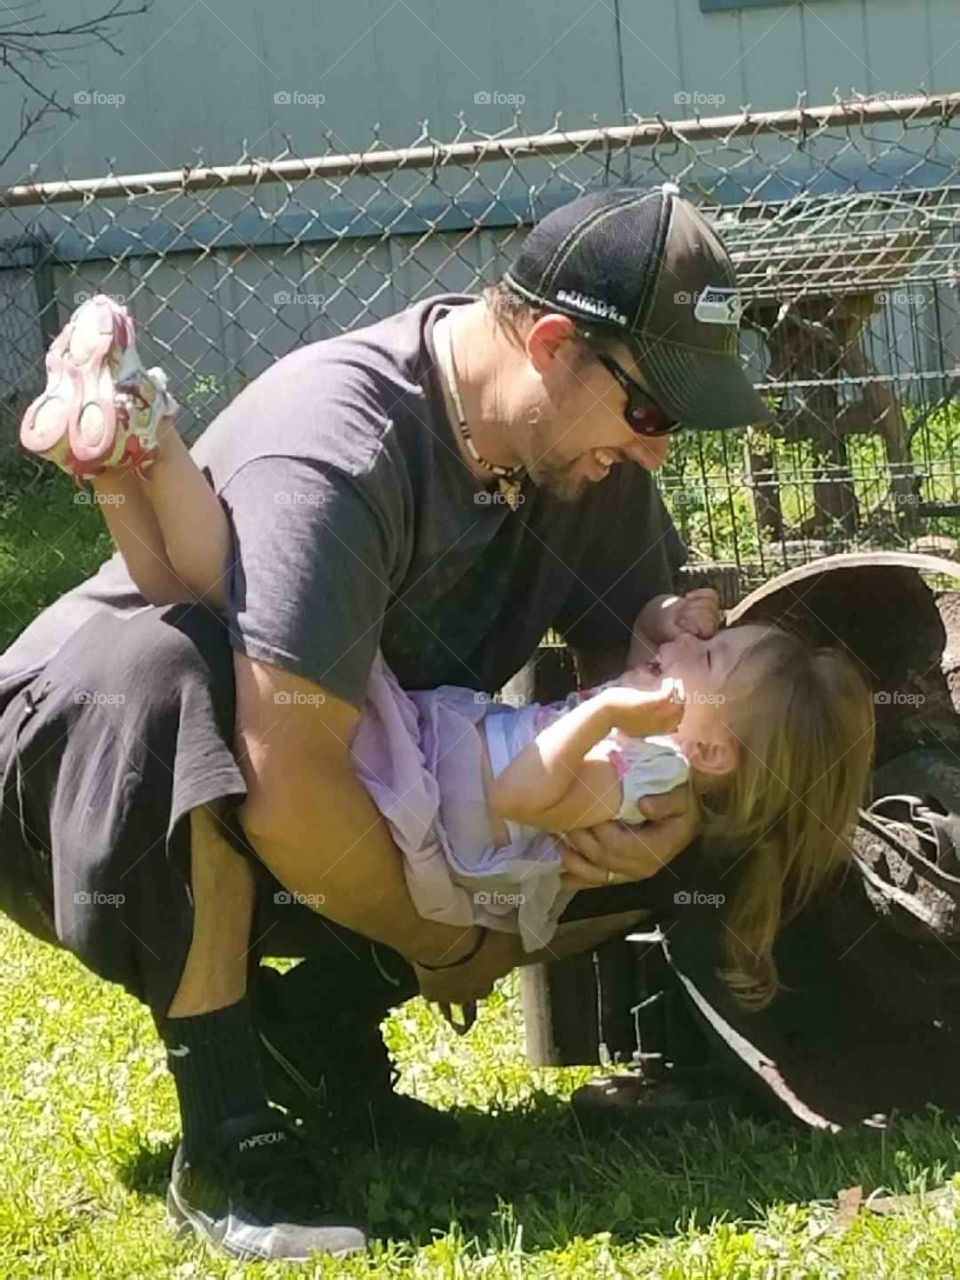 a father and his daughter playing together in Vidor Texas United States of America 2018